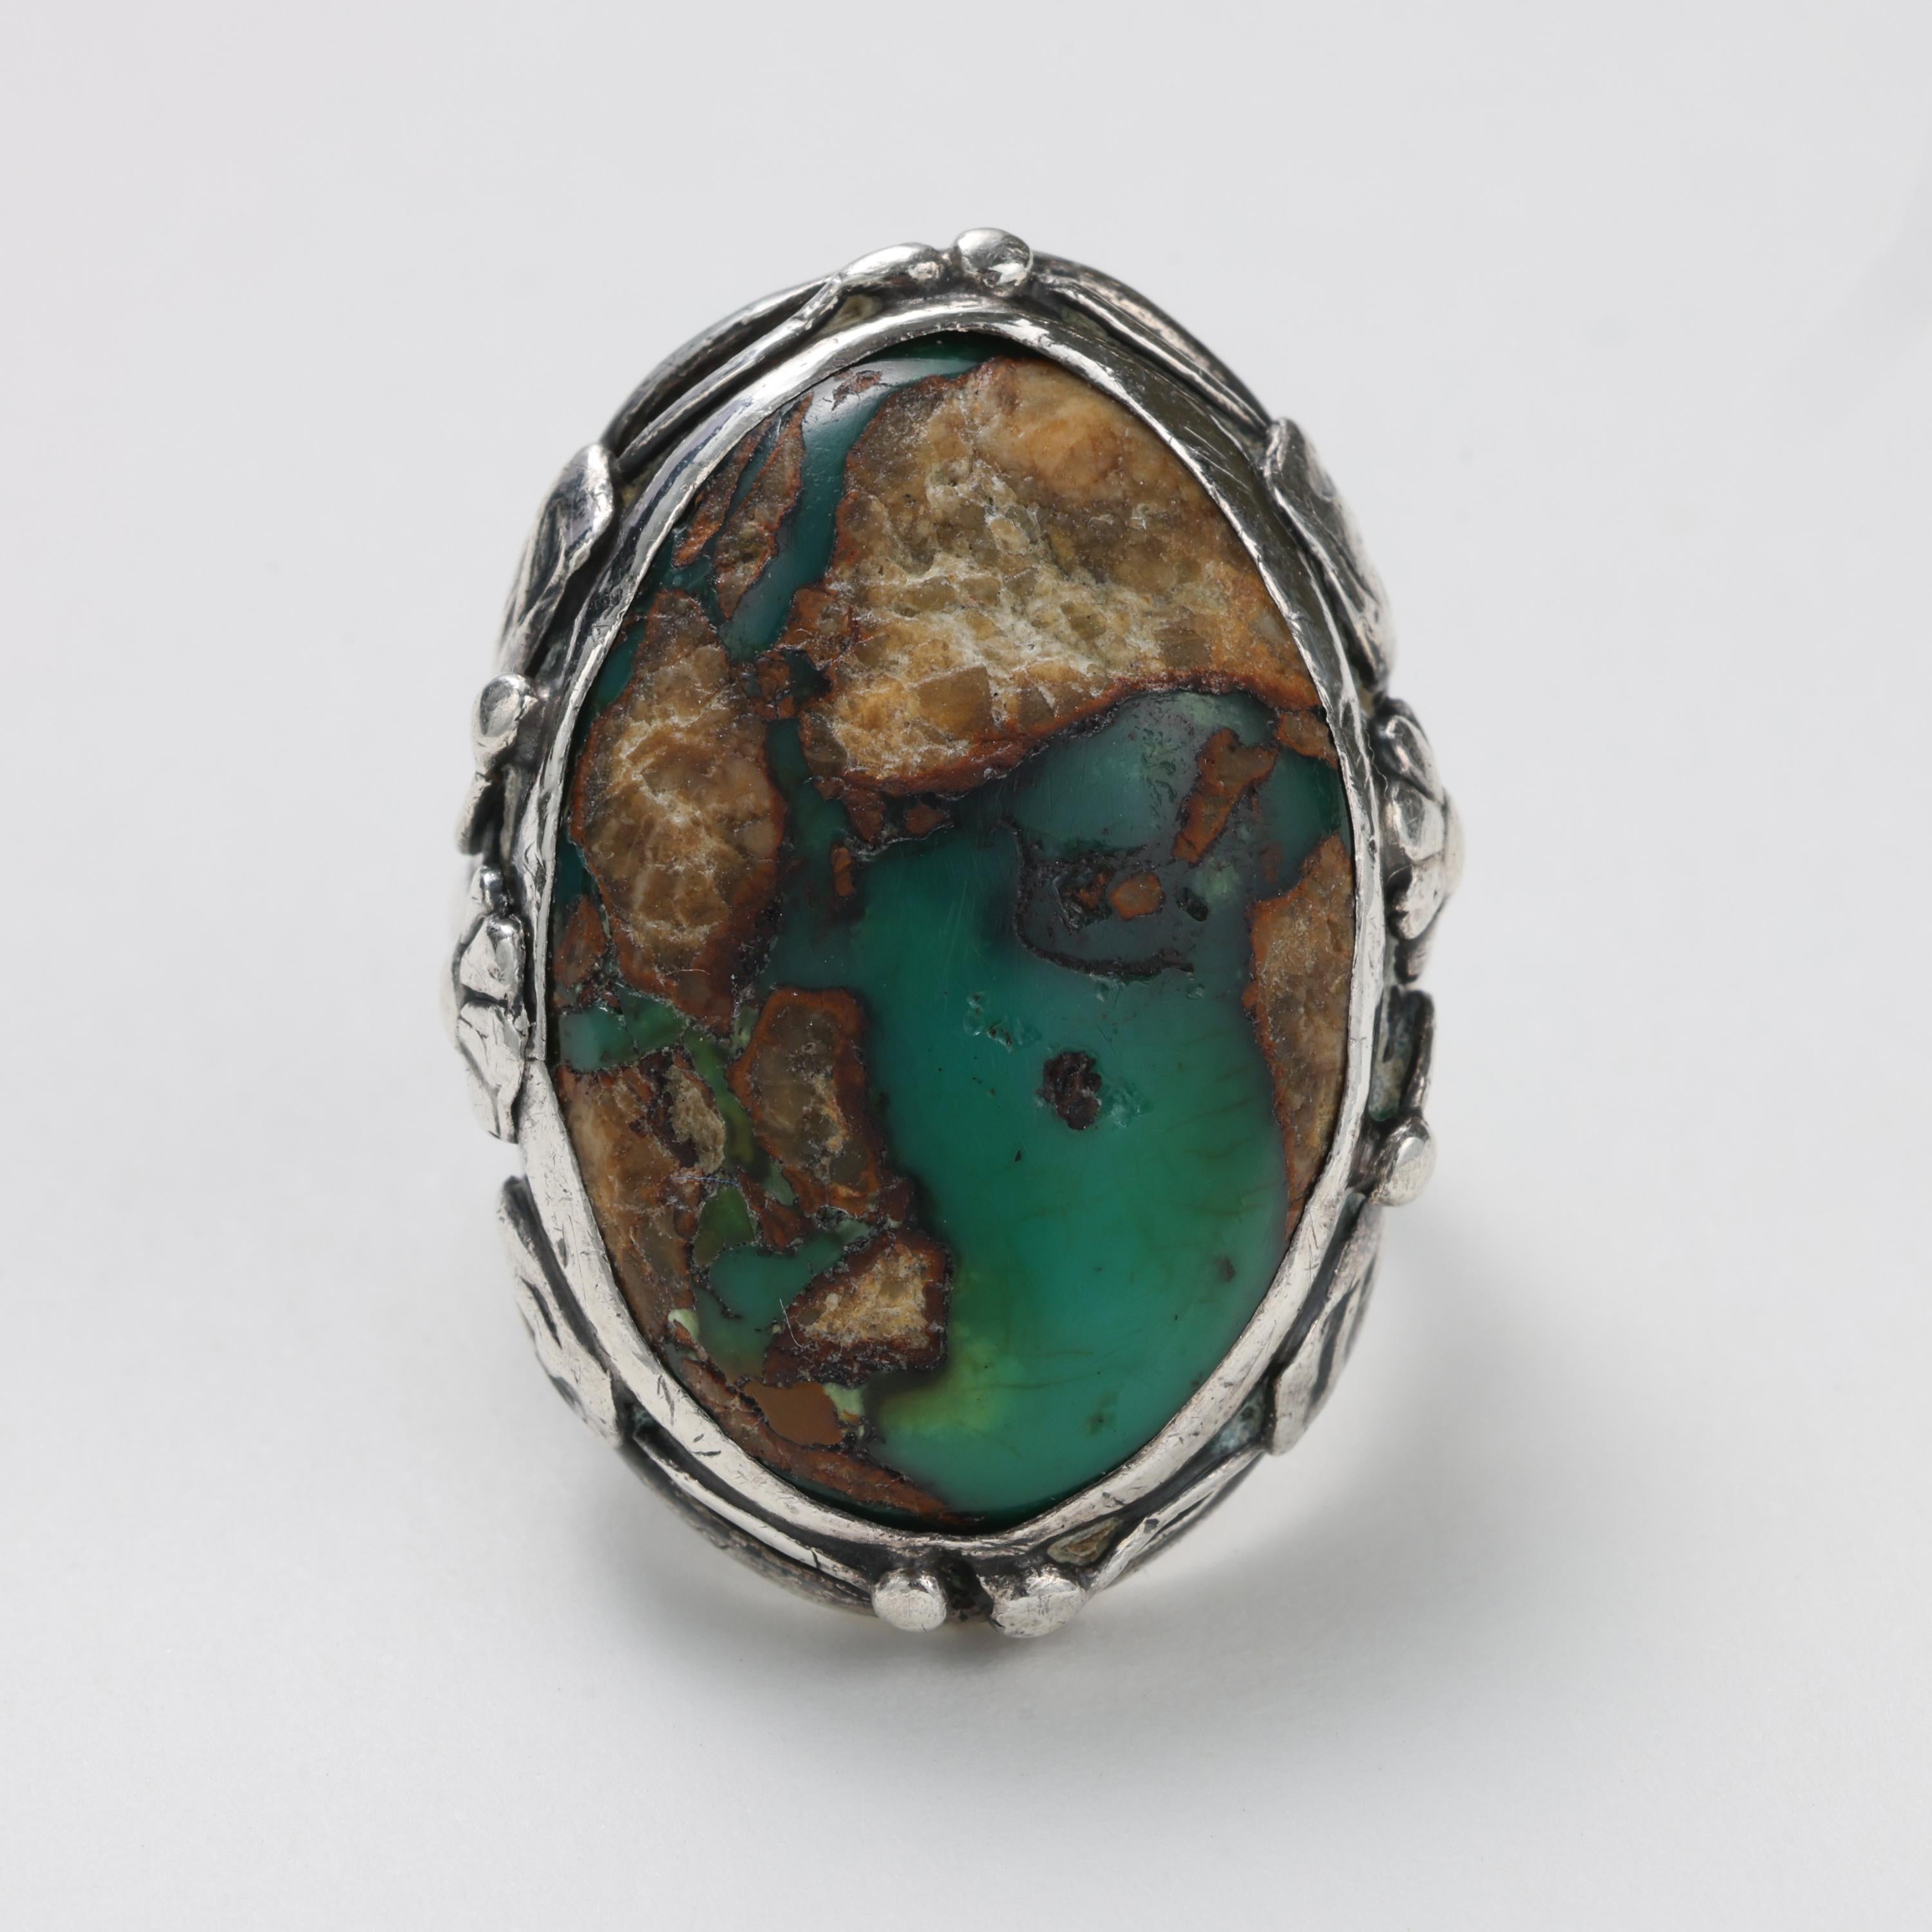 This is a gorgeous Arts & Crafts movement turquoise and silver ring entirely hand-crafted -from the cabochon to the mounting- most likely by a single individual, as was often the case with jewelry from this era. The Arts & Crafts movement was a